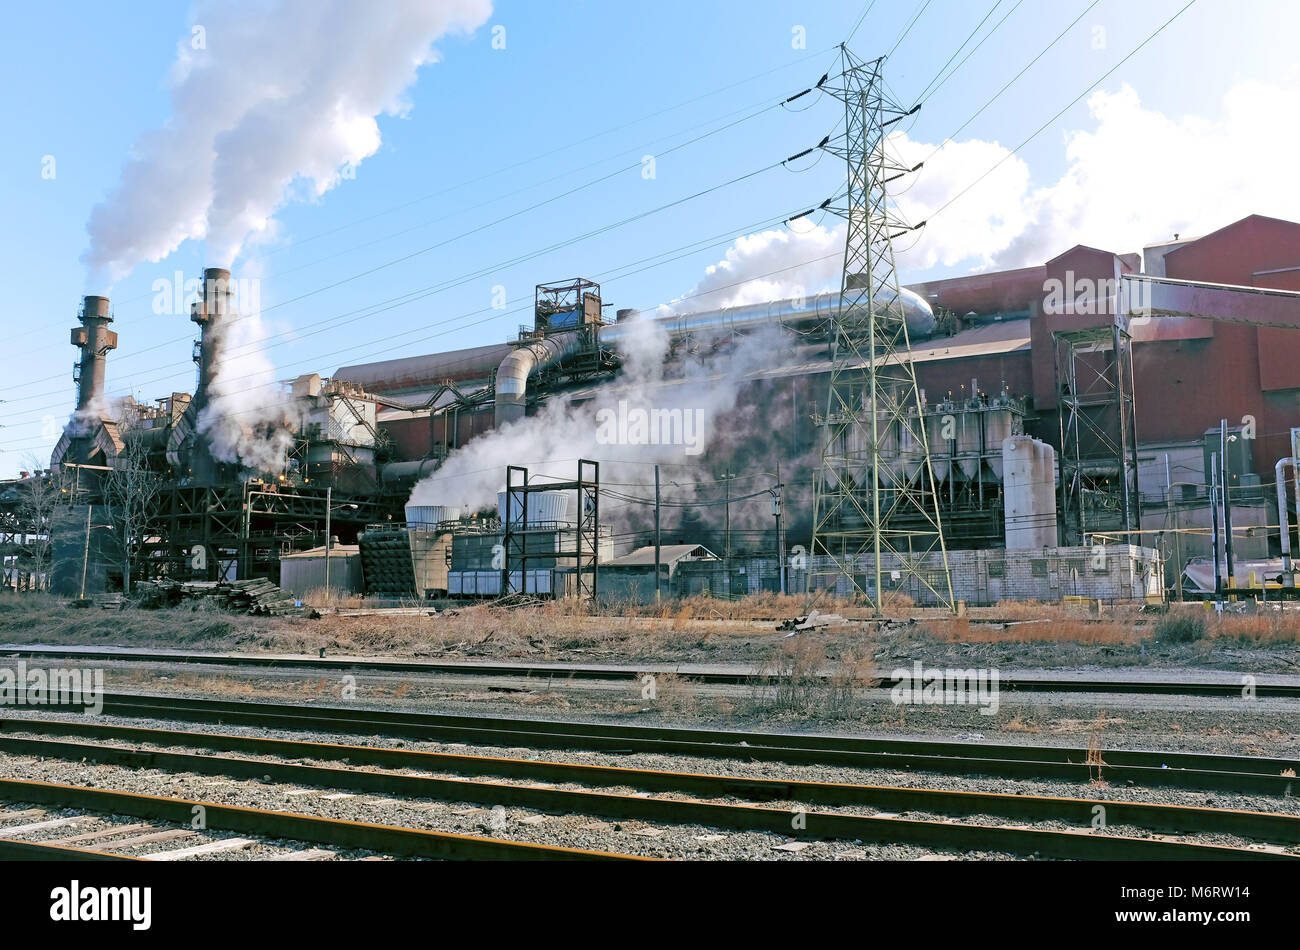 The steel industry in Cleveland, Ohio, USA is a shell of what it used to be yet functioning steelyard infrasctructure stil exists. Stock Photo